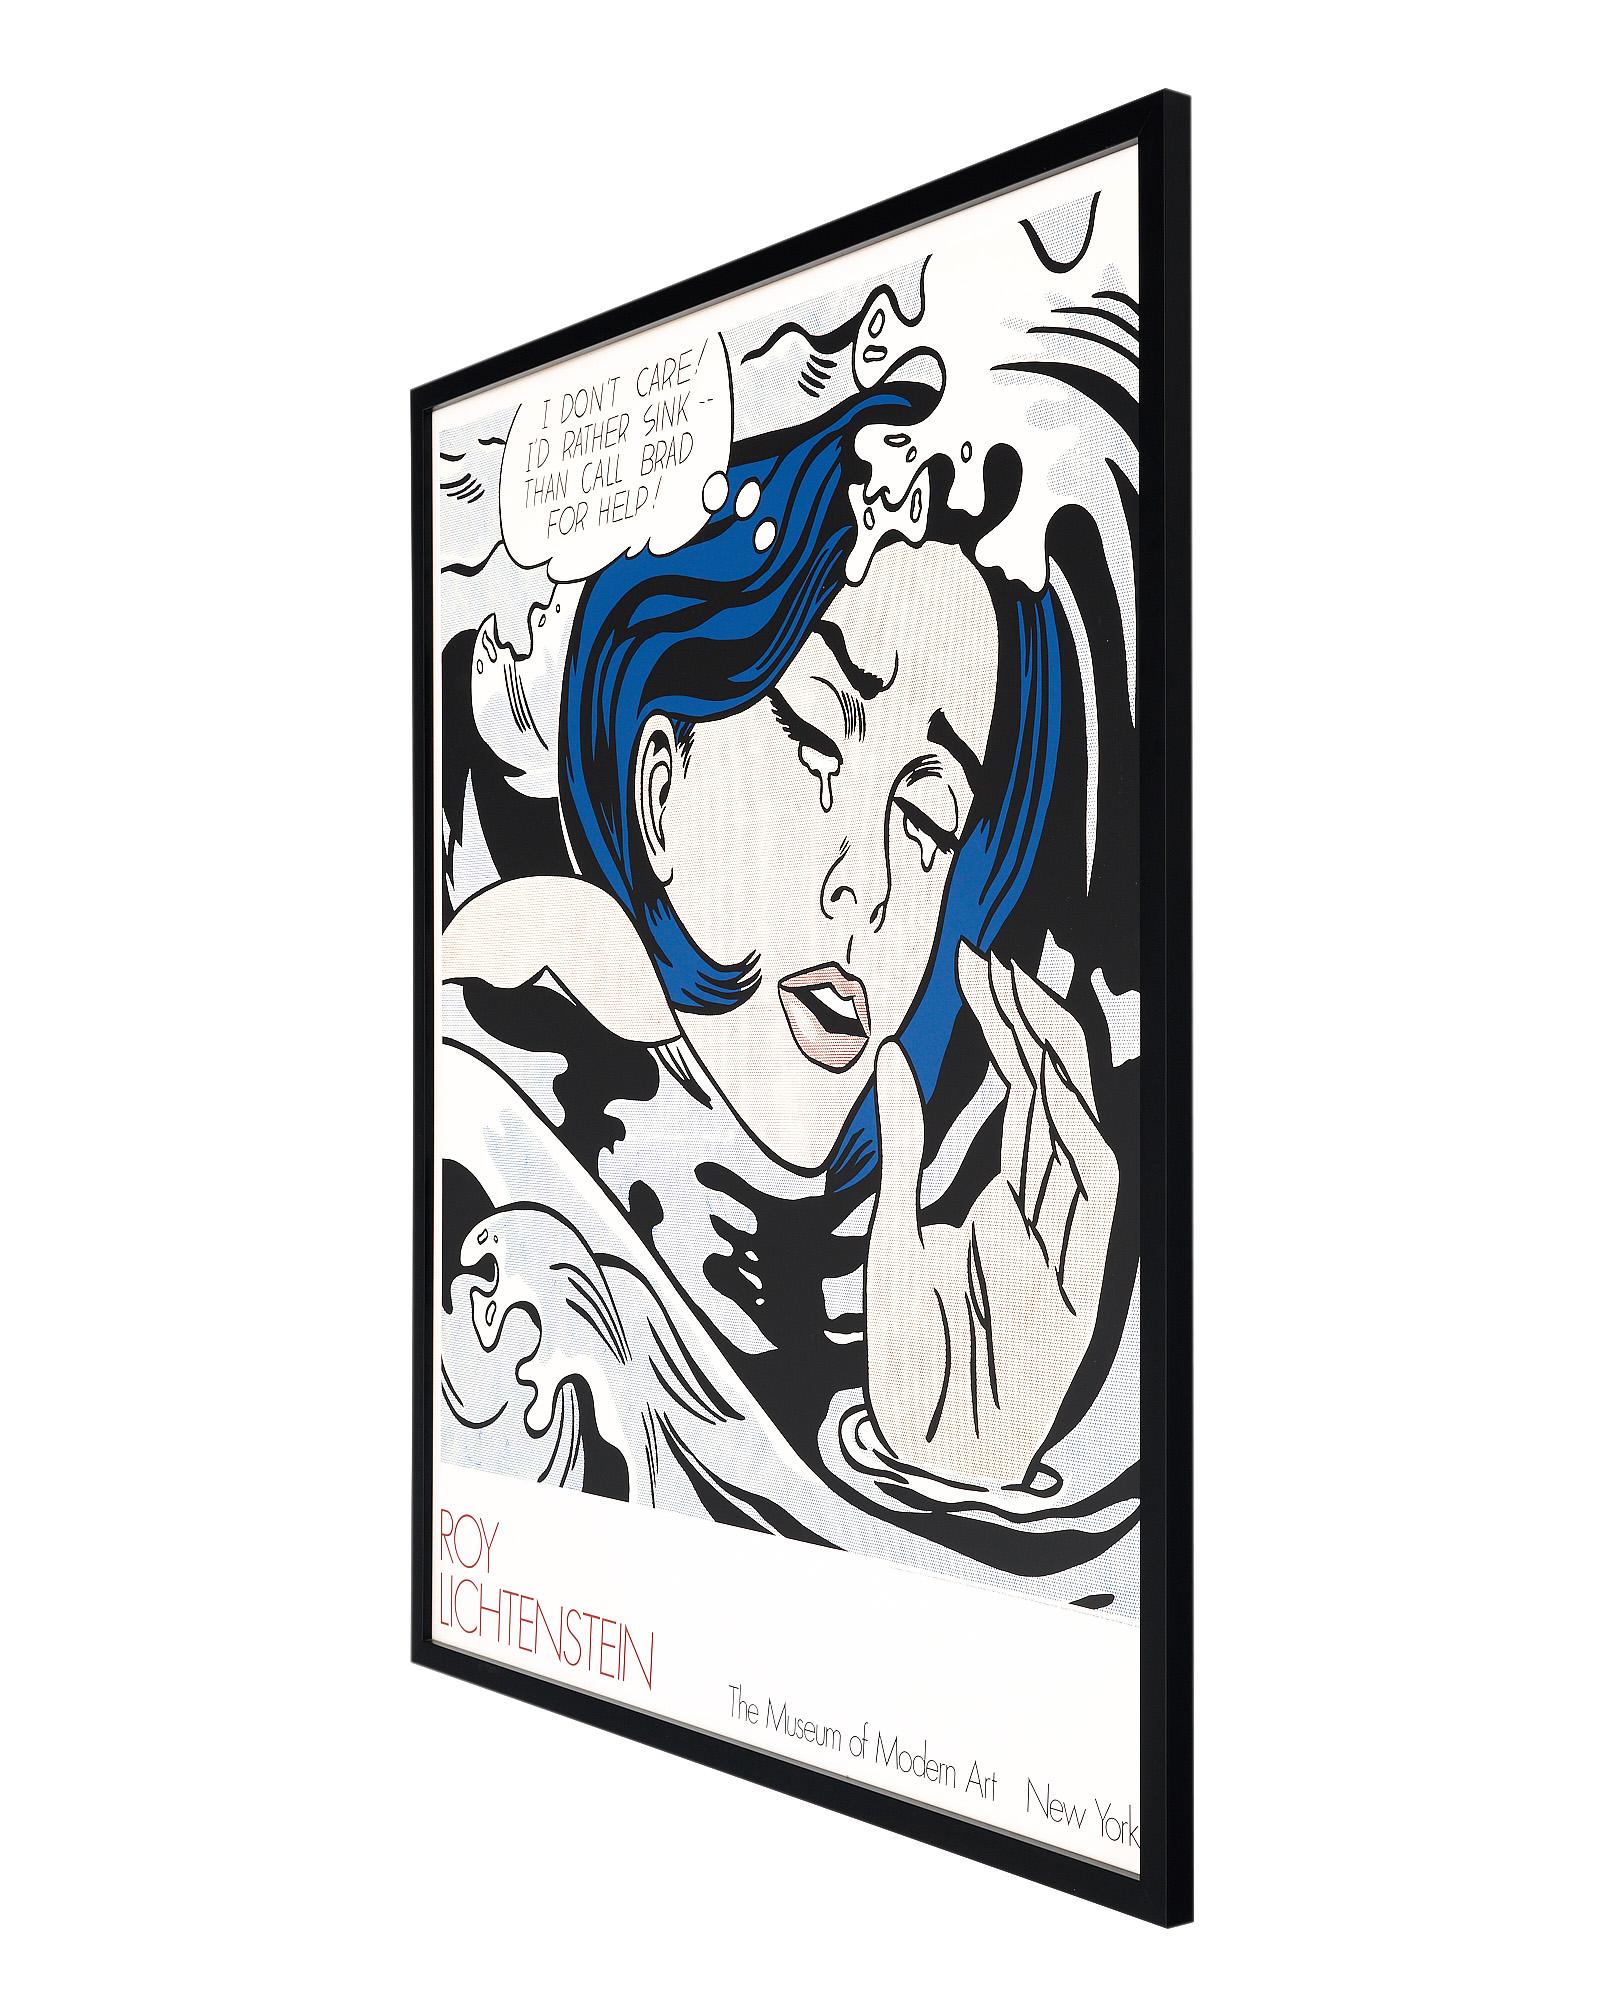 Framed print by Roy Lichtenstein created for the New York Museum of Modern Art in 1989. This original poster titled “Drowning Girl” was inspired by a DC Comic and shows a girl drowning in water and emotion. The speech bubble reads “I don’t care! I’d